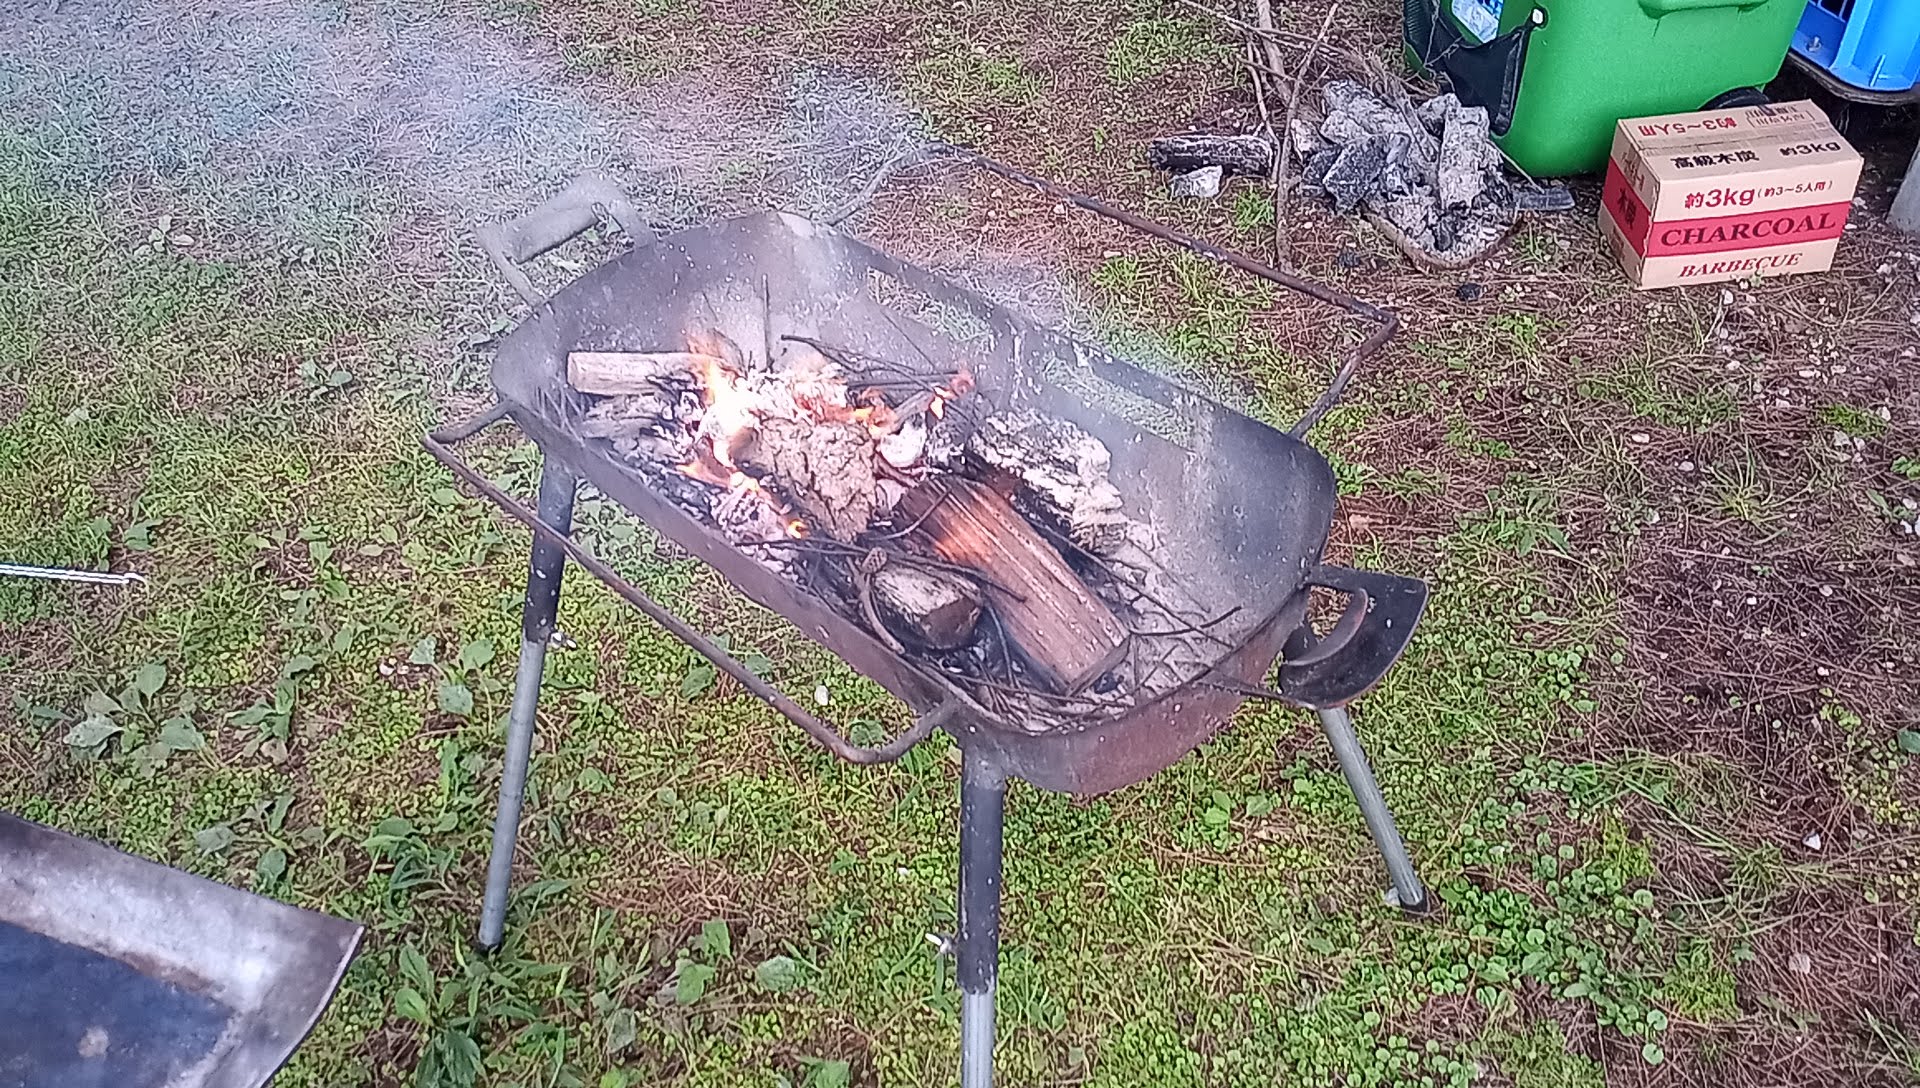 this time there was some charcoal left burning and smoking in the ashes. Since we were able to use this charcoal, we were able to easily start a fire without using a lighter or anything else.